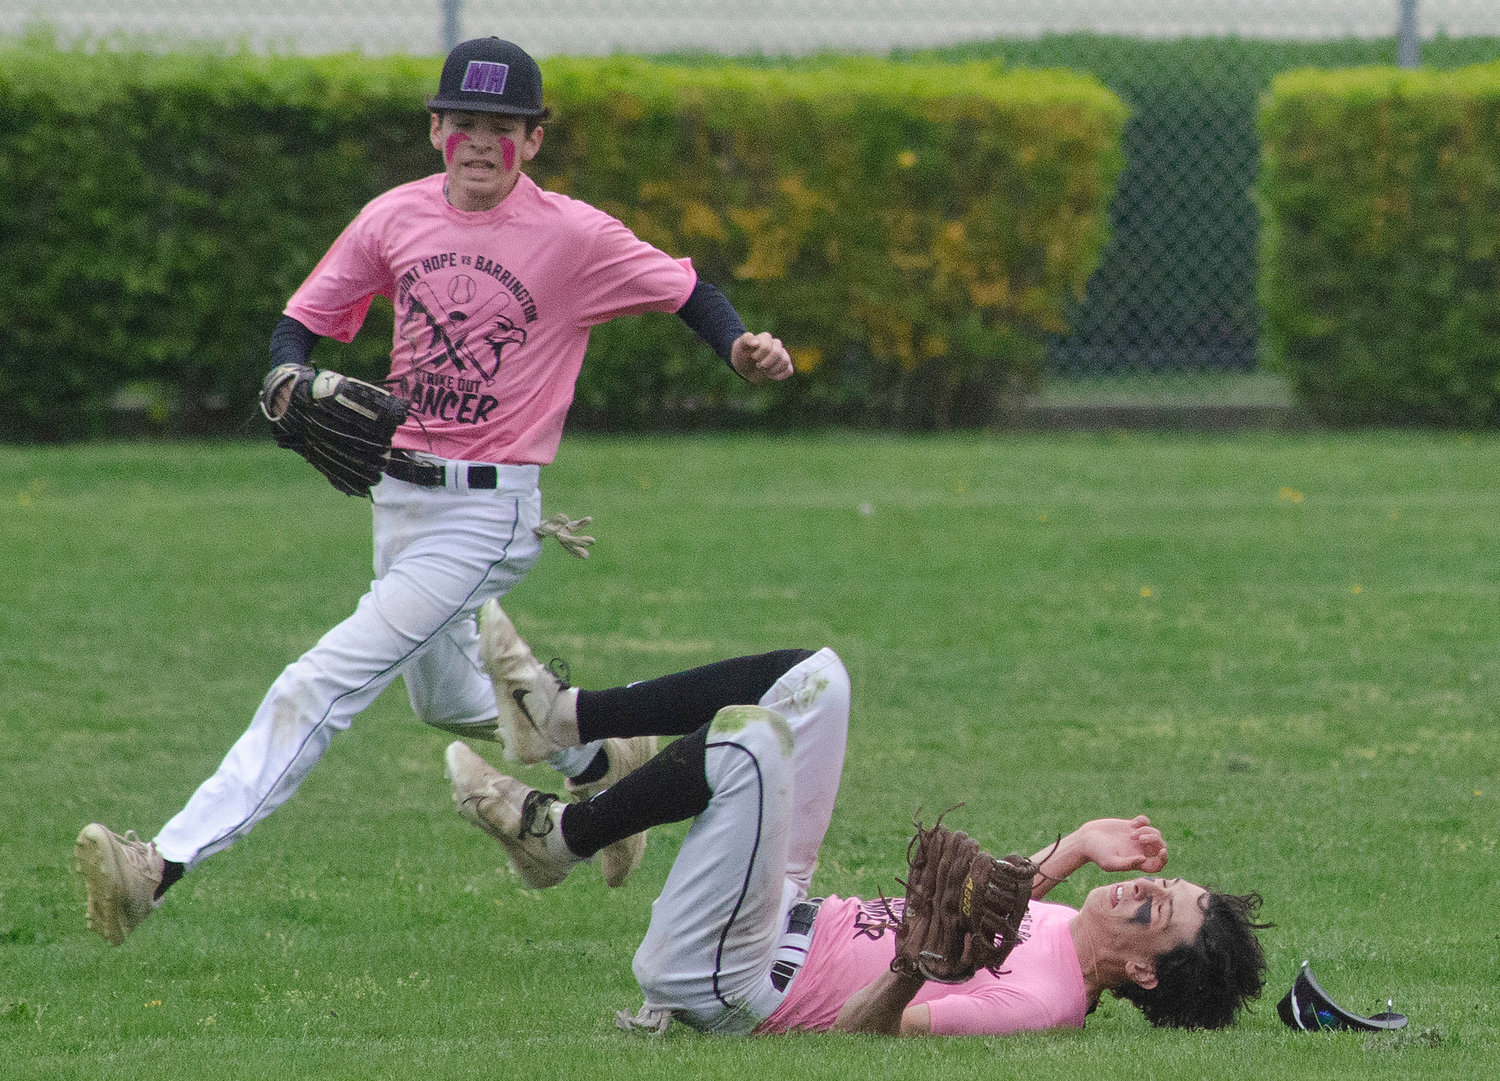 Ethan Santerre (left) runs in to aid center fielder Aidan Ramaglia after he dove and made a catch to record an out during their Strike-Out Cancer game on Friday.